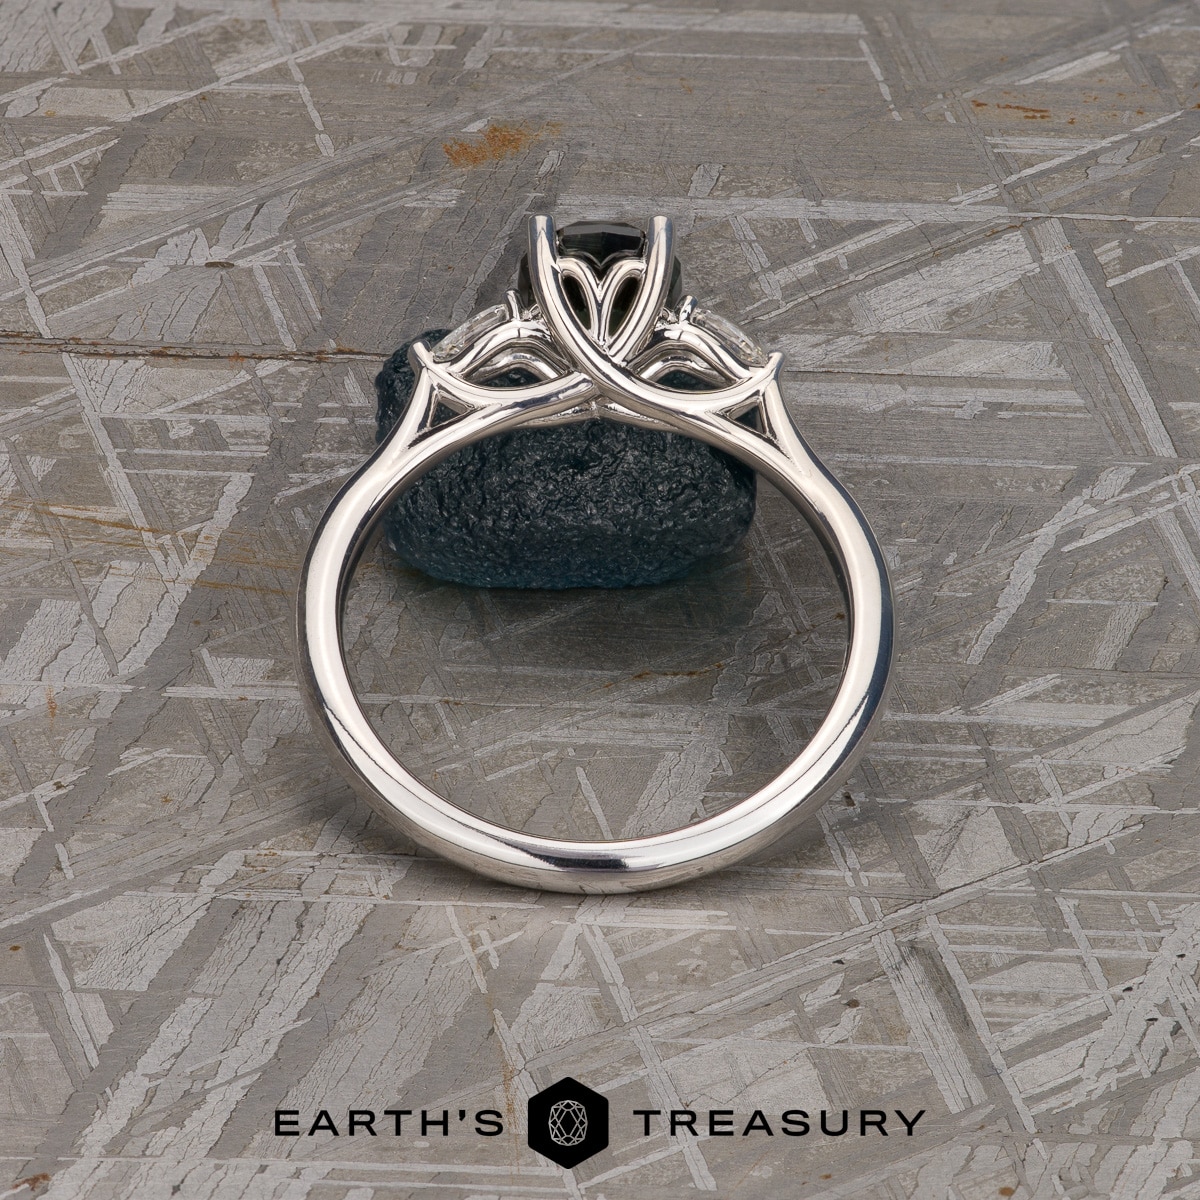 The "Multiflora" ring in 14k white gold with 1.65-Carat Australian Sapphire